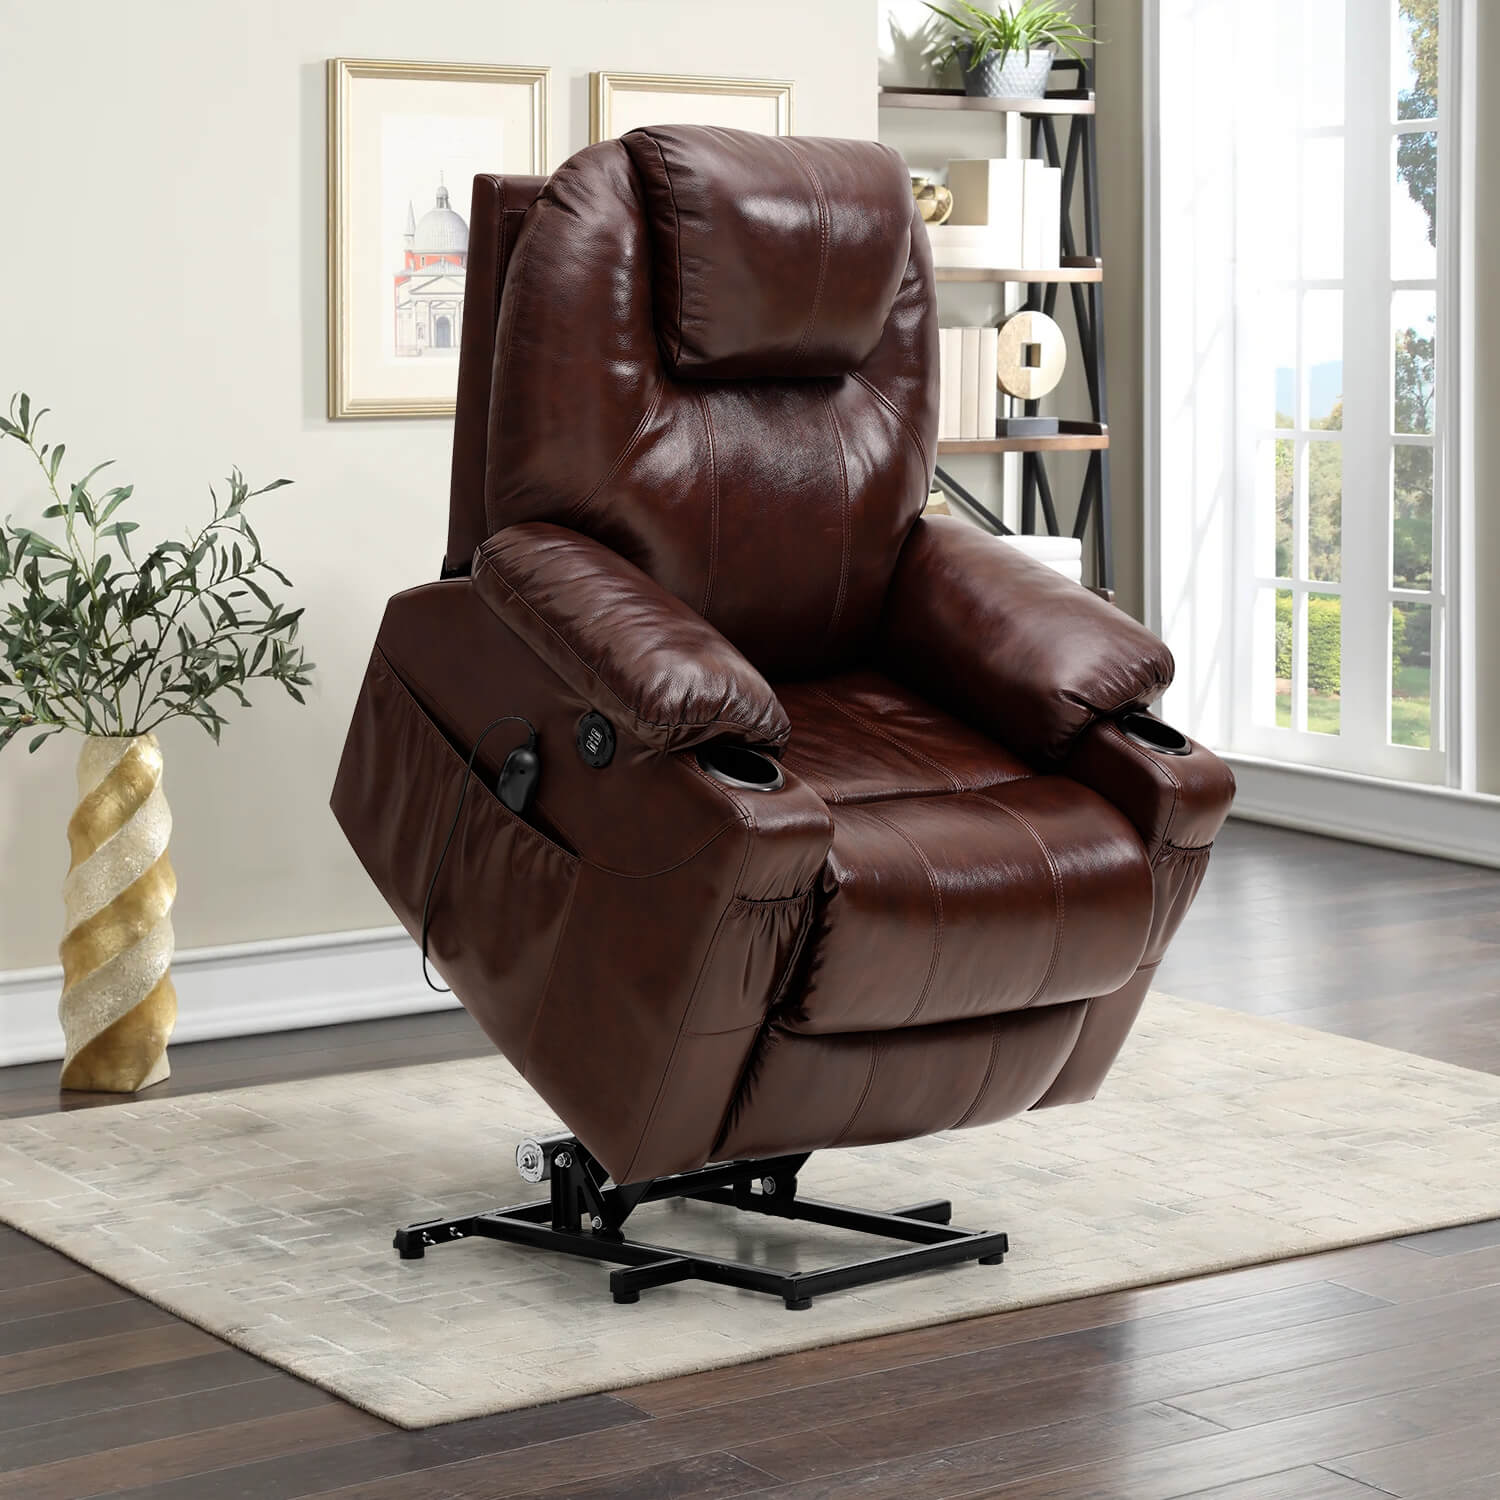 Large Genuine Leather Power Lift Chair Electric Recliner for Elderly with massage